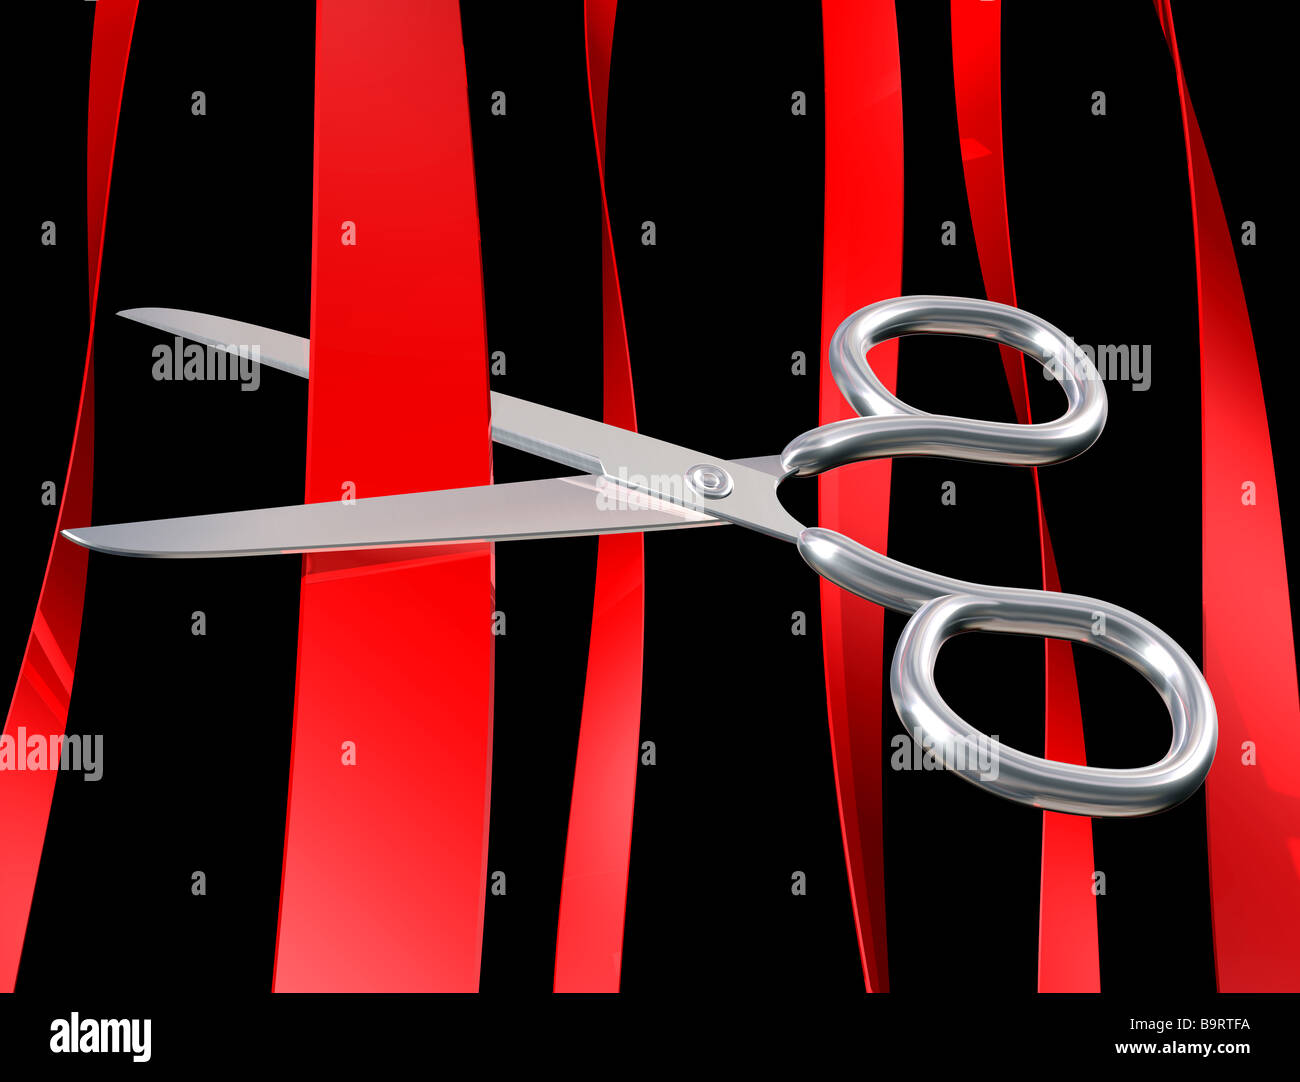 Illustration of silver scissors cutting through red tape Stock Photo